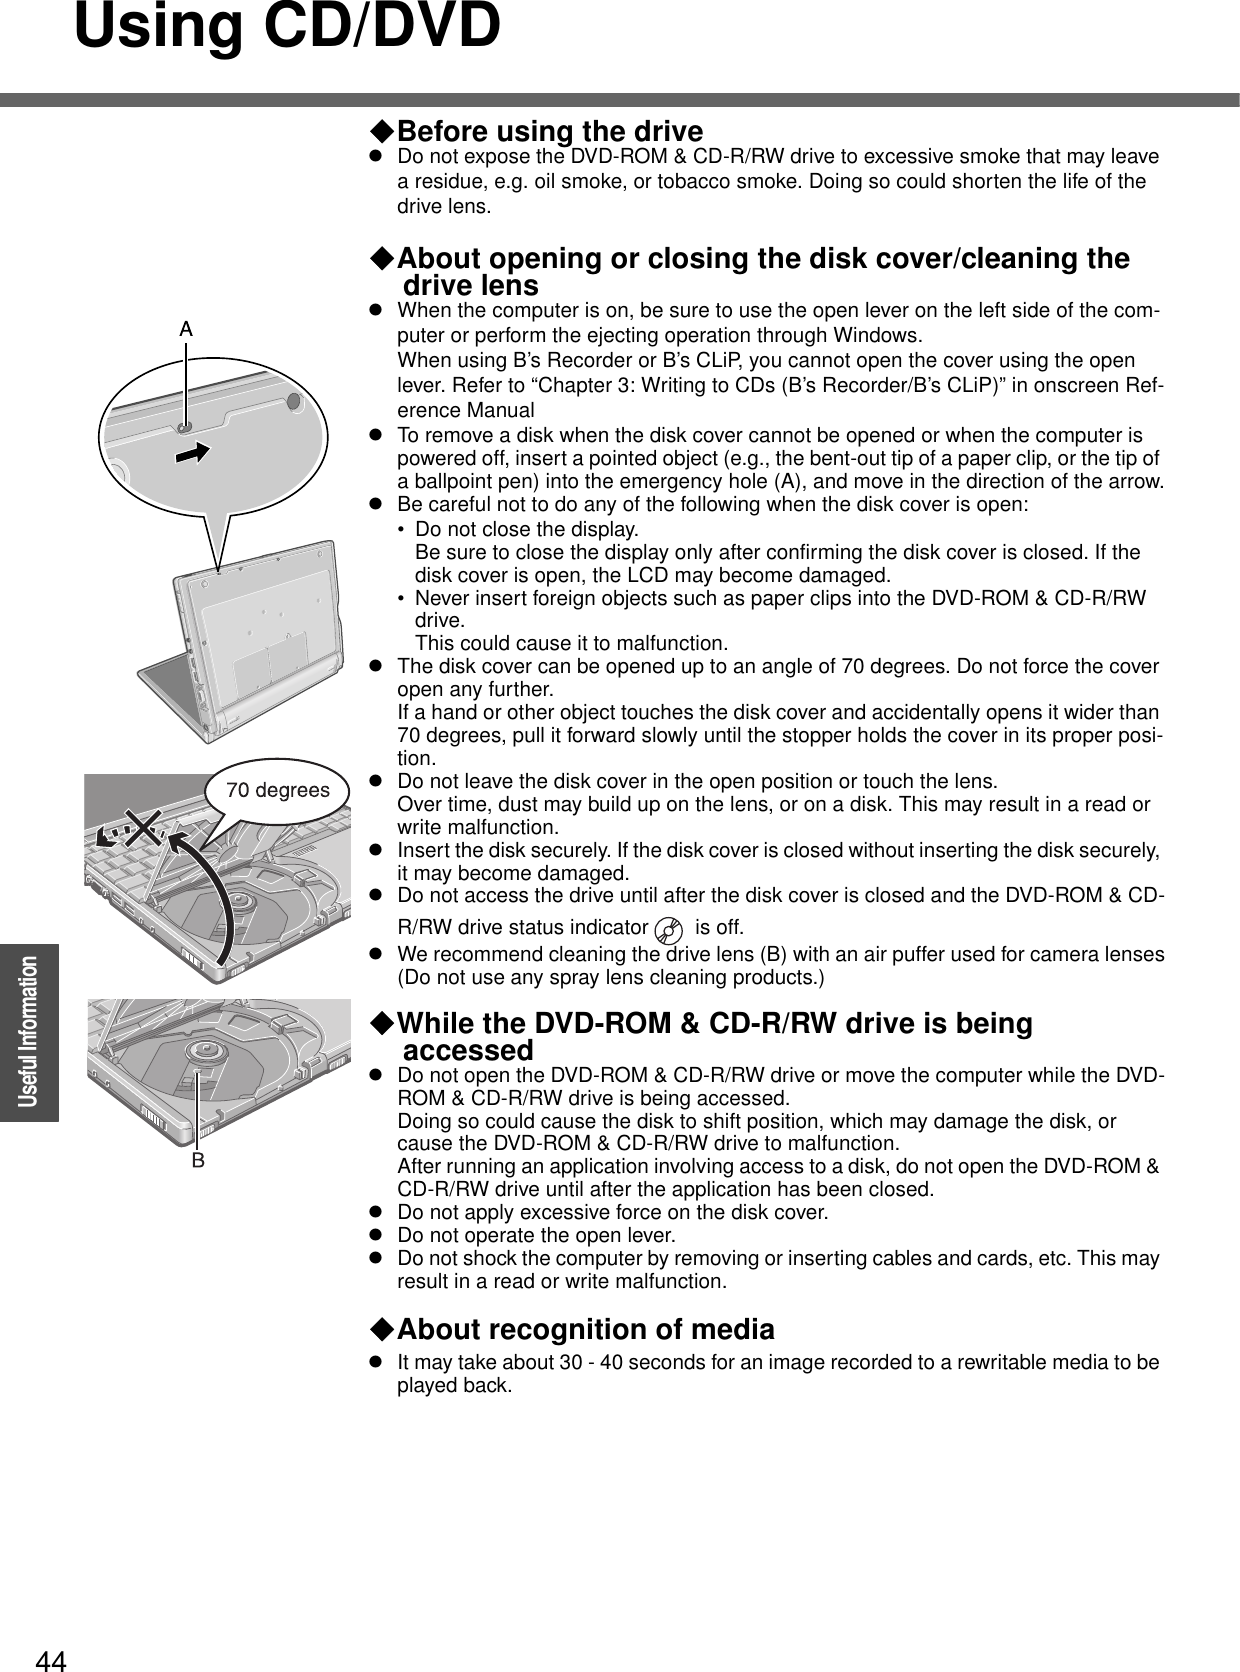 44OperationUseful InformationUsing CD/DVDBefore using the drivezDo not expose the DVD-ROM &amp; CD-R/RW drive to excessive smoke that may leave a residue, e.g. oil smoke, or tobacco smoke. Doing so could shorten the life of the drive lens.About opening or closing the disk cover/cleaning the drive lenszWhen the computer is on, be sure to use the open lever on the left side of the com-puter or perform the ejecting operation through Windows.When using B’s Recorder or B’s CLiP, you cannot open the cover using the open lever. Refer to “Chapter 3: Writing to CDs (B’s Recorder/B’s CLiP)” in onscreen Ref-erence ManualzTo remove a disk when the disk cover cannot be opened or when the computer is powered off, insert a pointed object (e.g., the bent-out tip of a paper clip, or the tip of a ballpoint pen) into the emergency hole (A), and move in the direction of the arrow.zBe careful not to do any of the following when the disk cover is open:• Do not close the display.Be sure to close the display only after confirming the disk cover is closed. If the disk cover is open, the LCD may become damaged.• Never insert foreign objects such as paper clips into the DVD-ROM &amp; CD-R/RW drive. This could cause it to malfunction.zThe disk cover can be opened up to an angle of 70 degrees. Do not force the cover open any further.If a hand or other object touches the disk cover and accidentally opens it wider than 70 degrees, pull it forward slowly until the stopper holds the cover in its proper posi-tion.zDo not leave the disk cover in the open position or touch the lens.Over time, dust may build up on the lens, or on a disk. This may result in a read or write malfunction.zInsert the disk securely. If the disk cover is closed without inserting the disk securely, it may become damaged.zDo not access the drive until after the disk cover is closed and the DVD-ROM &amp; CD-R/RW drive status indicator   is off.zWe recommend cleaning the drive lens (B) with an air puffer used for camera lenses(Do not use any spray lens cleaning products.)While the DVD-ROM &amp; CD-R/RW drive is being accessedzDo not open the DVD-ROM &amp; CD-R/RW drive or move the computer while the DVD-ROM &amp; CD-R/RW drive is being accessed.Doing so could cause the disk to shift position, which may damage the disk, or cause the DVD-ROM &amp; CD-R/RW drive to malfunction.After running an application involving access to a disk, do not open the DVD-ROM &amp; CD-R/RW drive until after the application has been closed.zDo not apply excessive force on the disk cover.zDo not operate the open lever.zDo not shock the computer by removing or inserting cables and cards, etc. This may result in a read or write malfunction.About recognition of mediazIt may take about 30 - 40 seconds for an image recorded to a rewritable media to be played back.